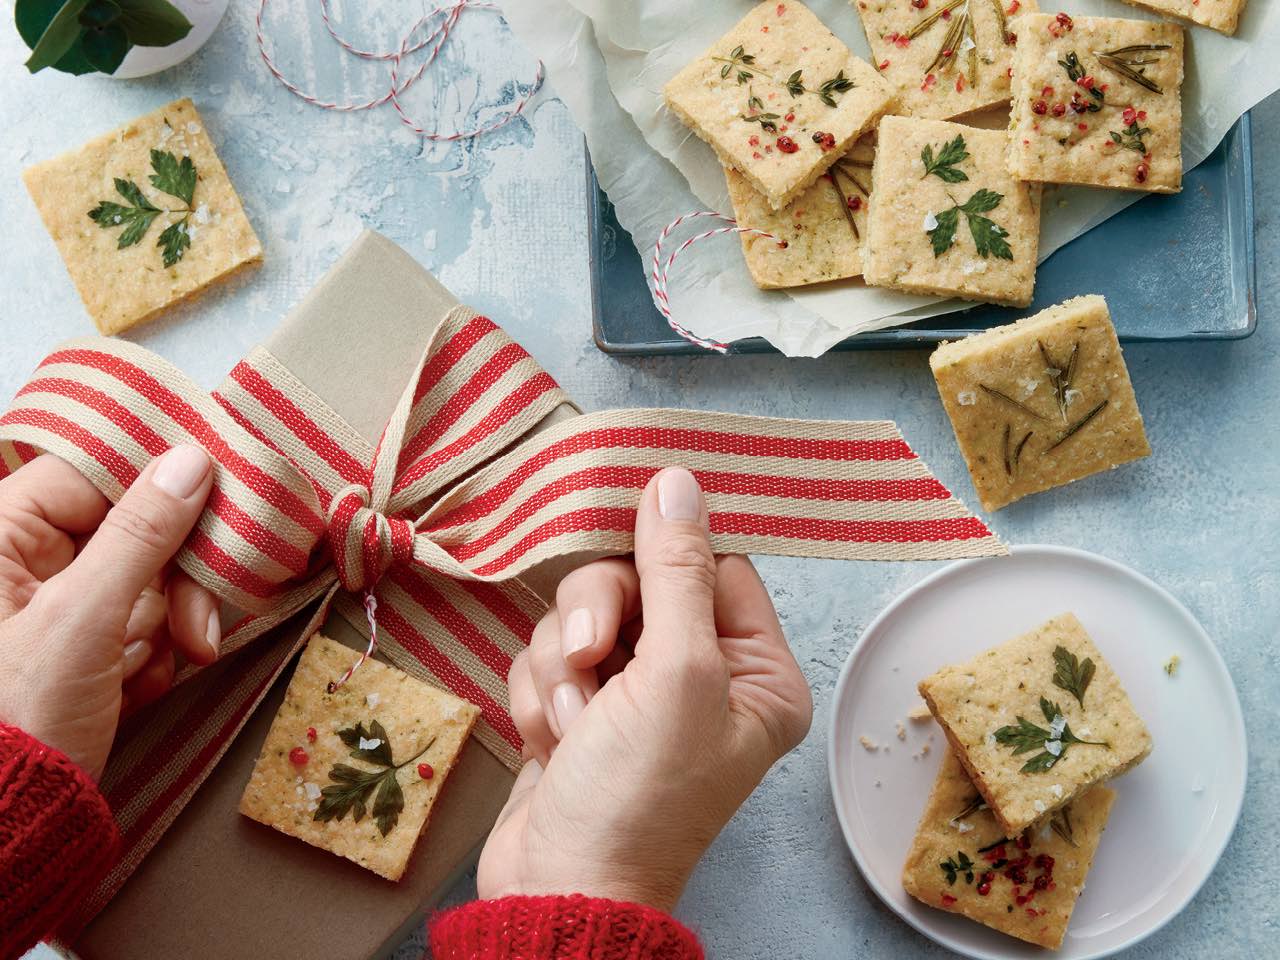 Savoury shortbread cookies on plate, next to brown-paper-wrapped gift with hands tying ribbon